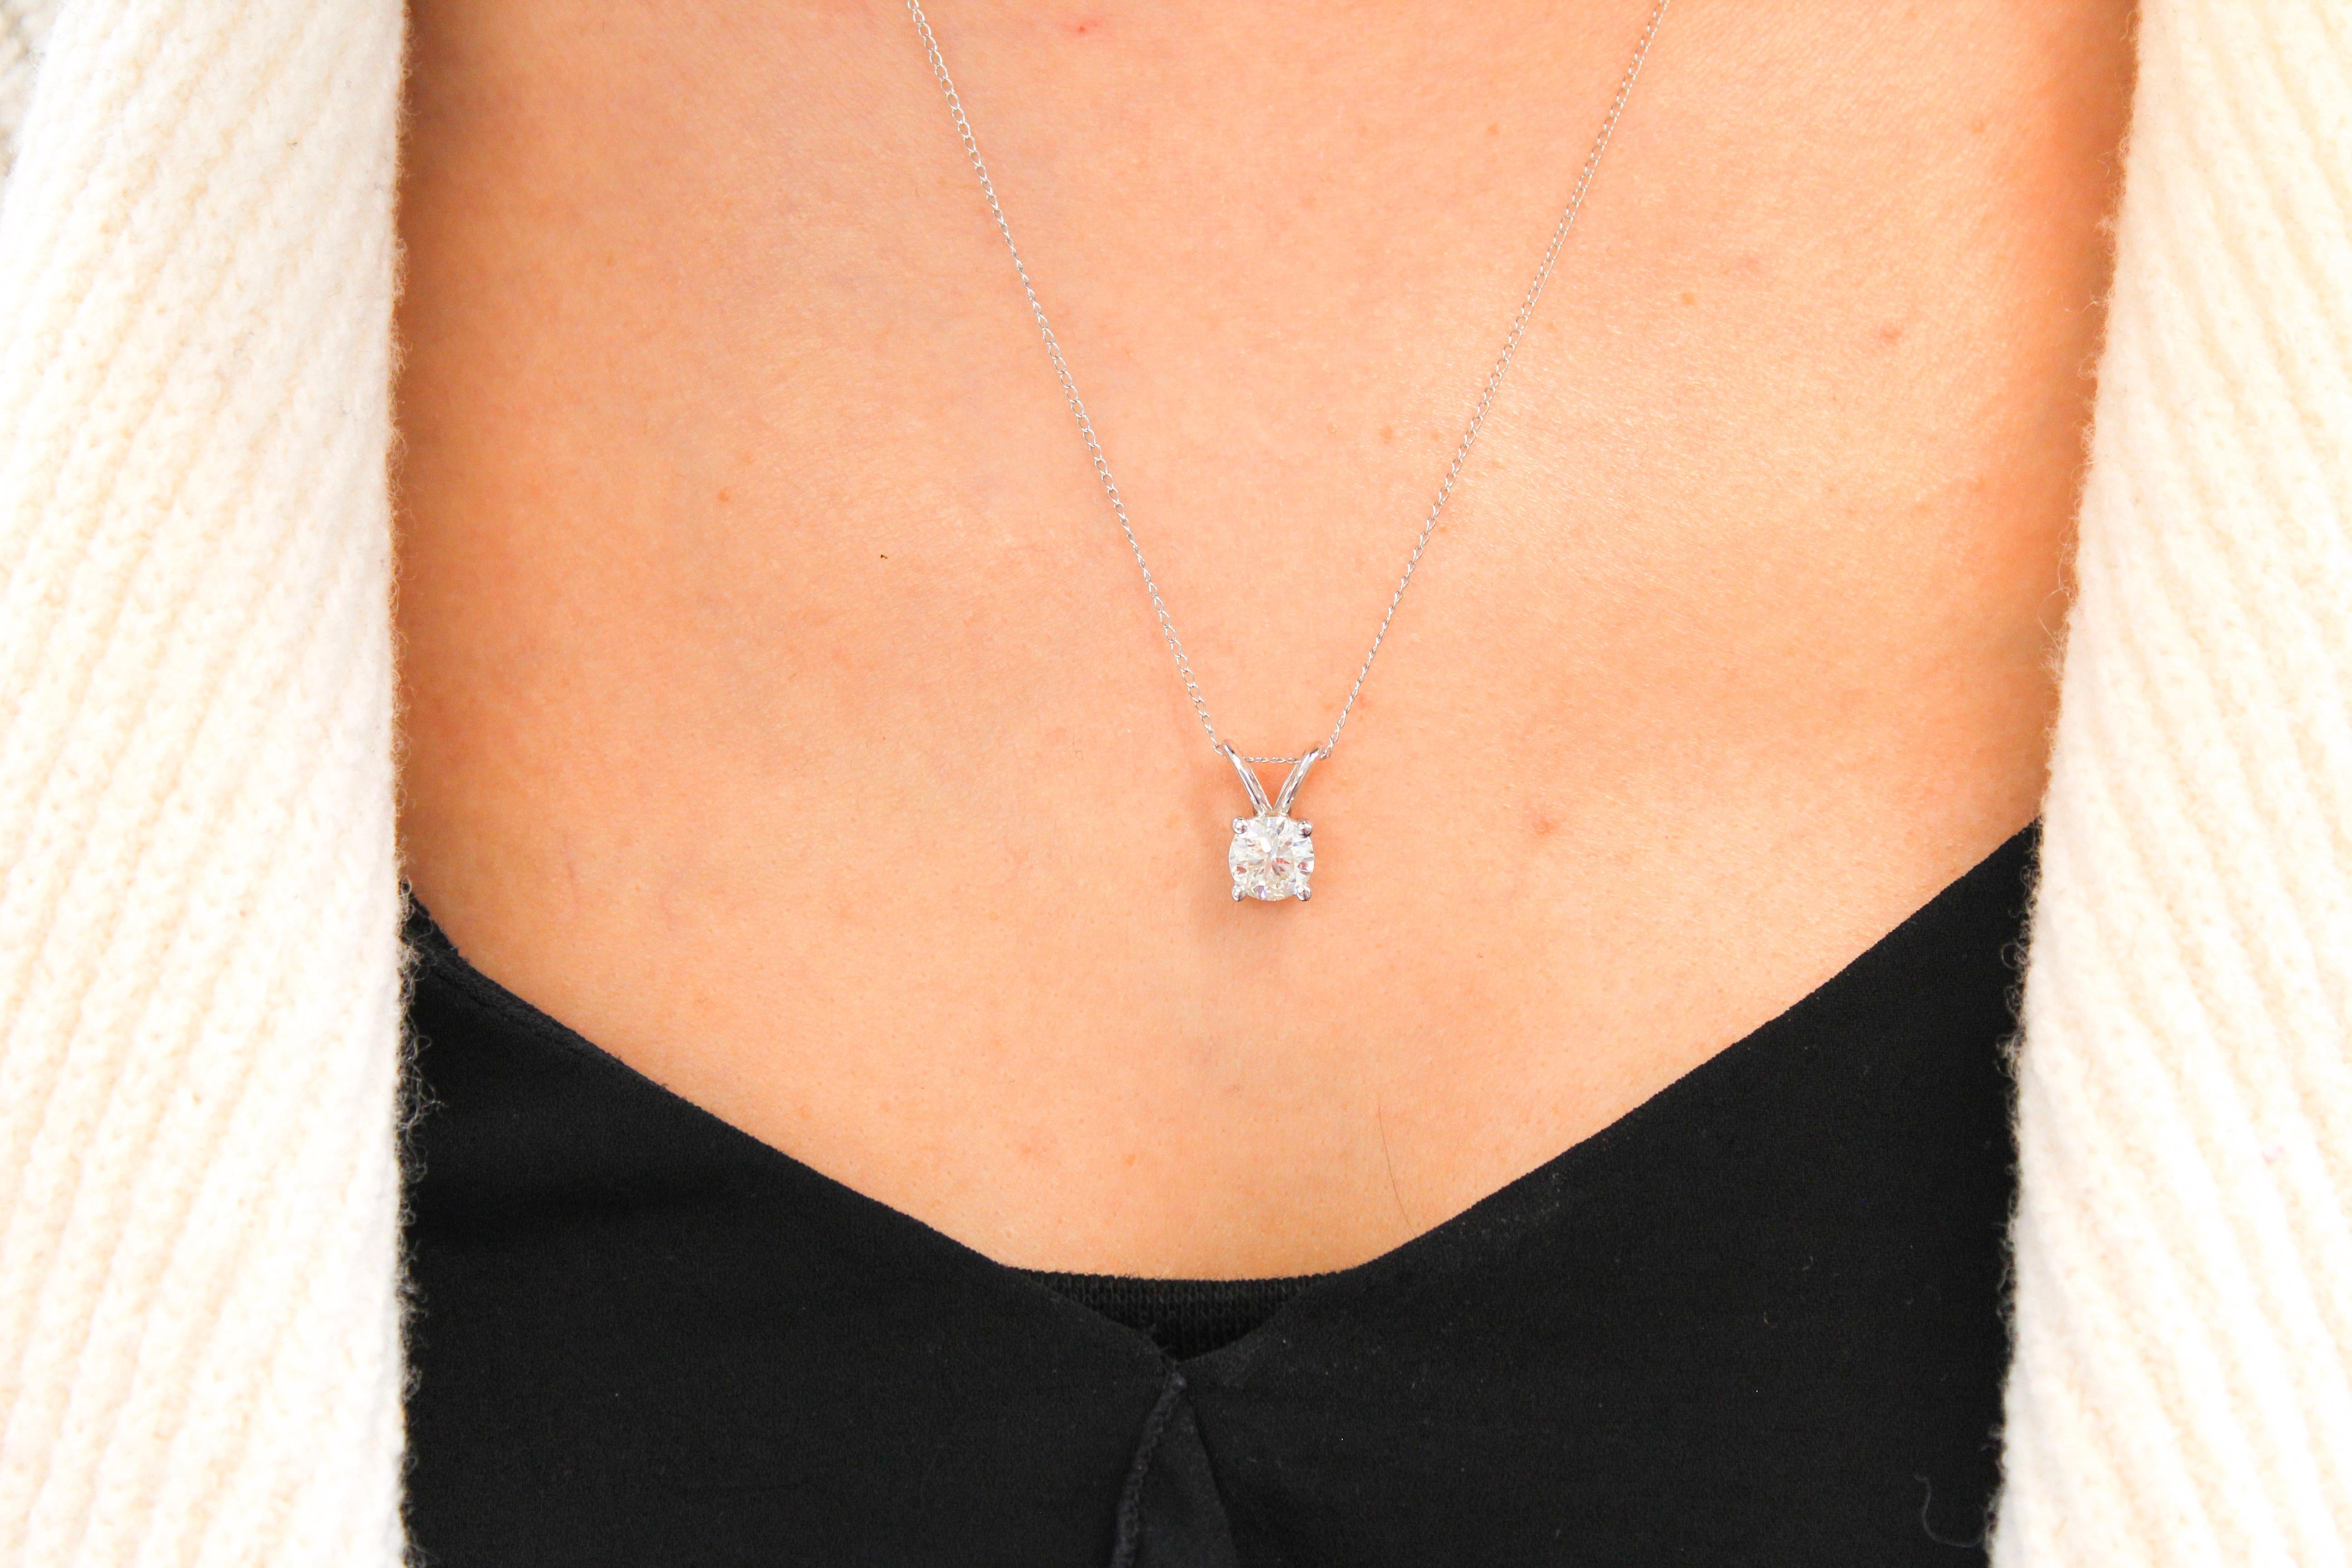 This impressive diamond solitaire pendant is finely crafted in brightly polished 14 karat rose gold and features a round shaped 1.25 carat diamond that has SI clarity, gracefully prong set on a shiny split bail. Ideal as an anniversary or birthday